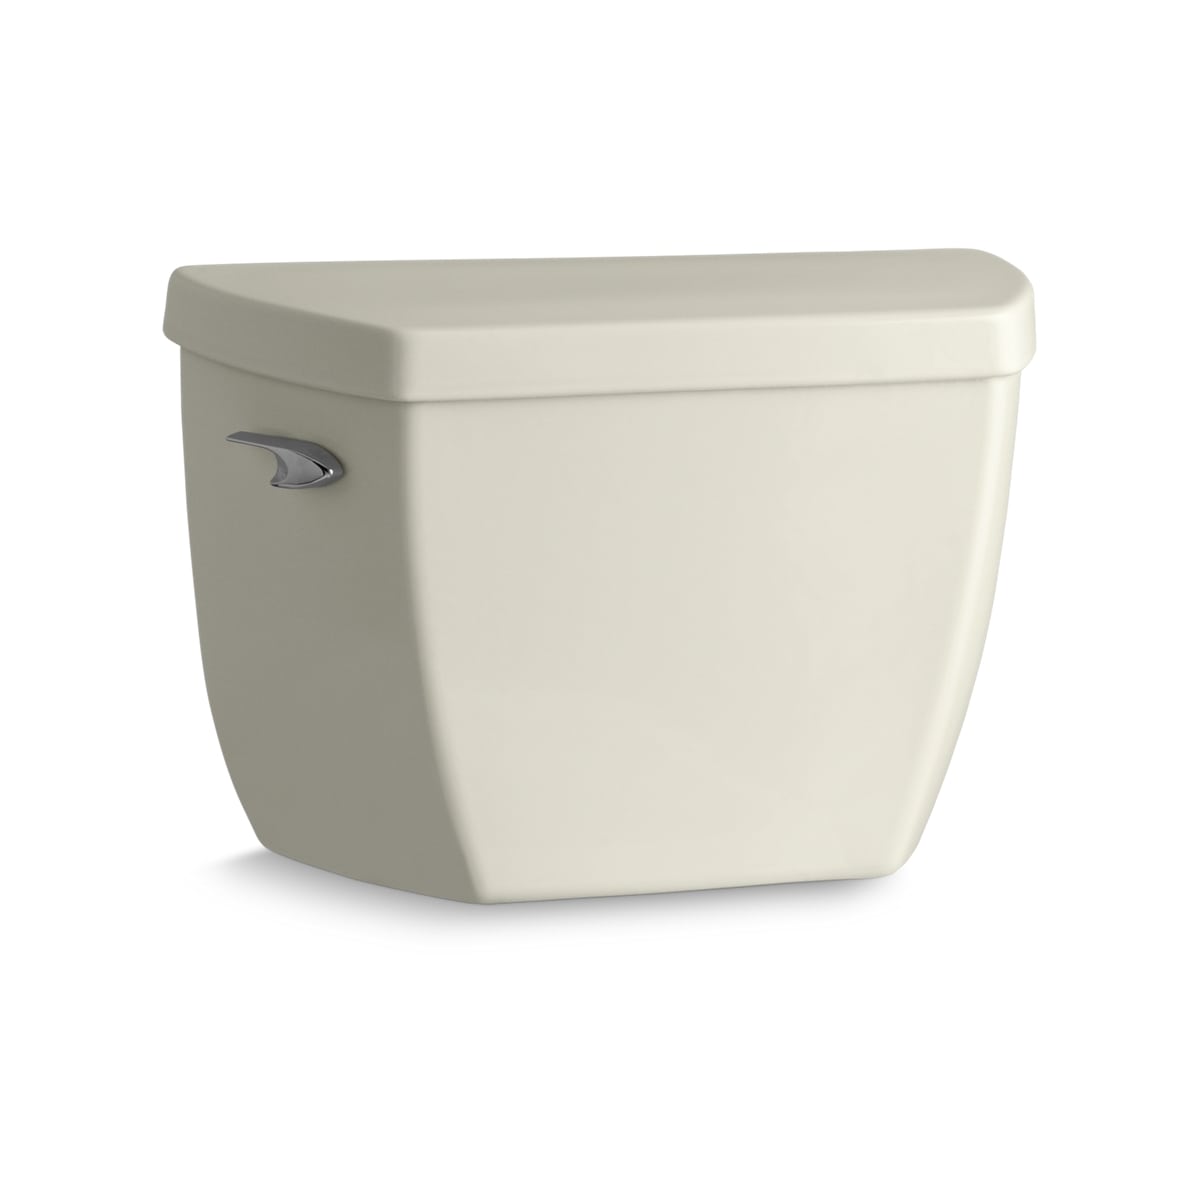 Mexican Sand Kohler K-4484-T-33 Highline Classic 1.0 gpf Toilet Tank with Tank Cover Locks and Left-Hand Trip Lever 